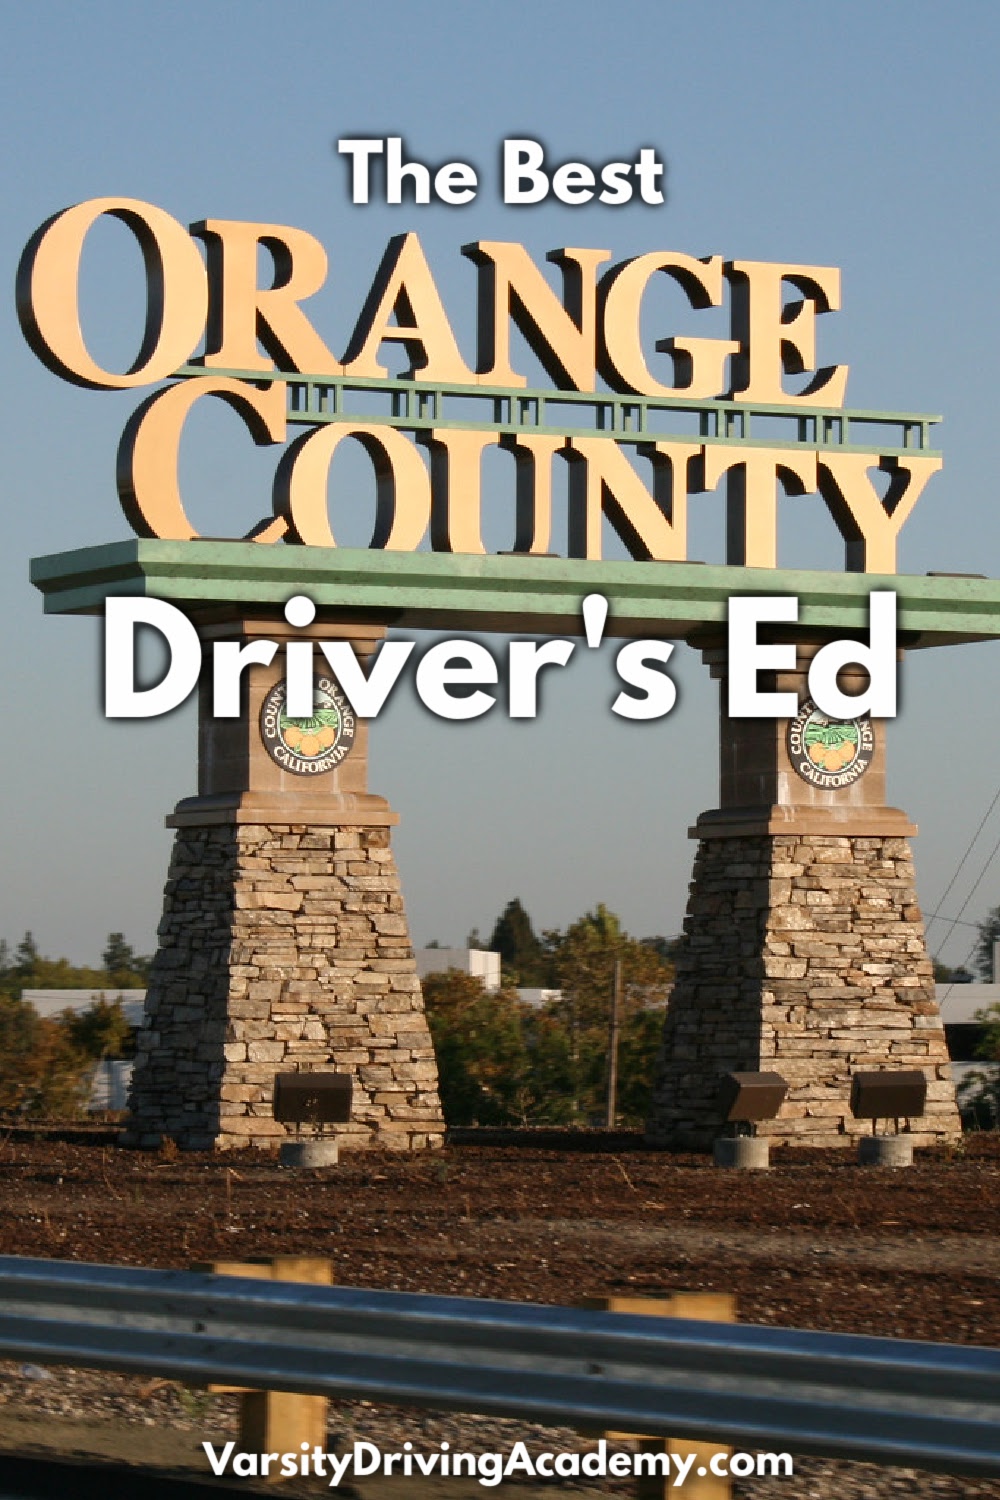 The best Orange County drivers ed is Varsity Driving Academy, where teens and adults will learn how to drive defensively and safely.